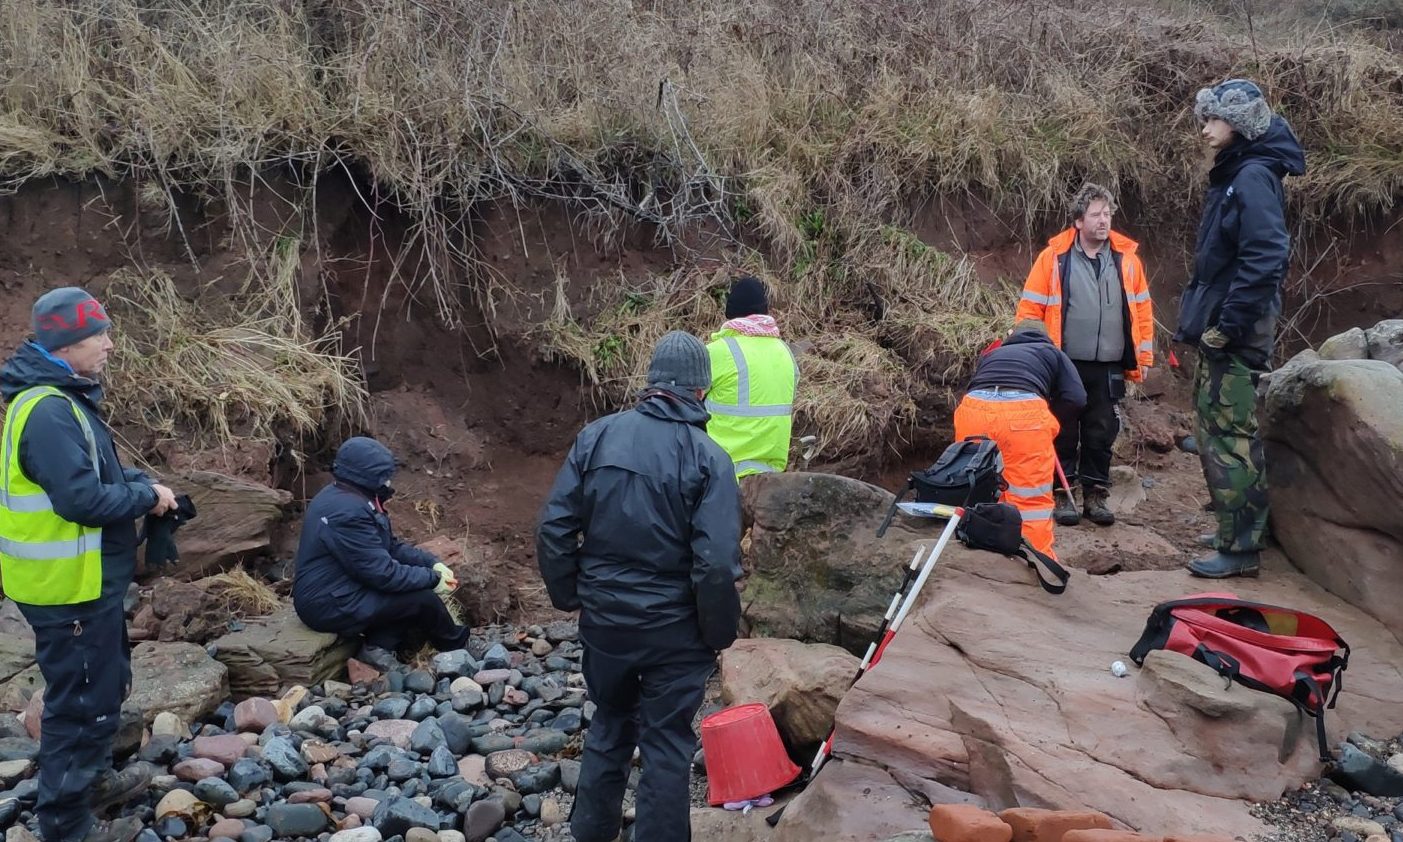 Volunteers and archaeologist begin the investigation after human remains discovered in Wemyss Caves, Fife.